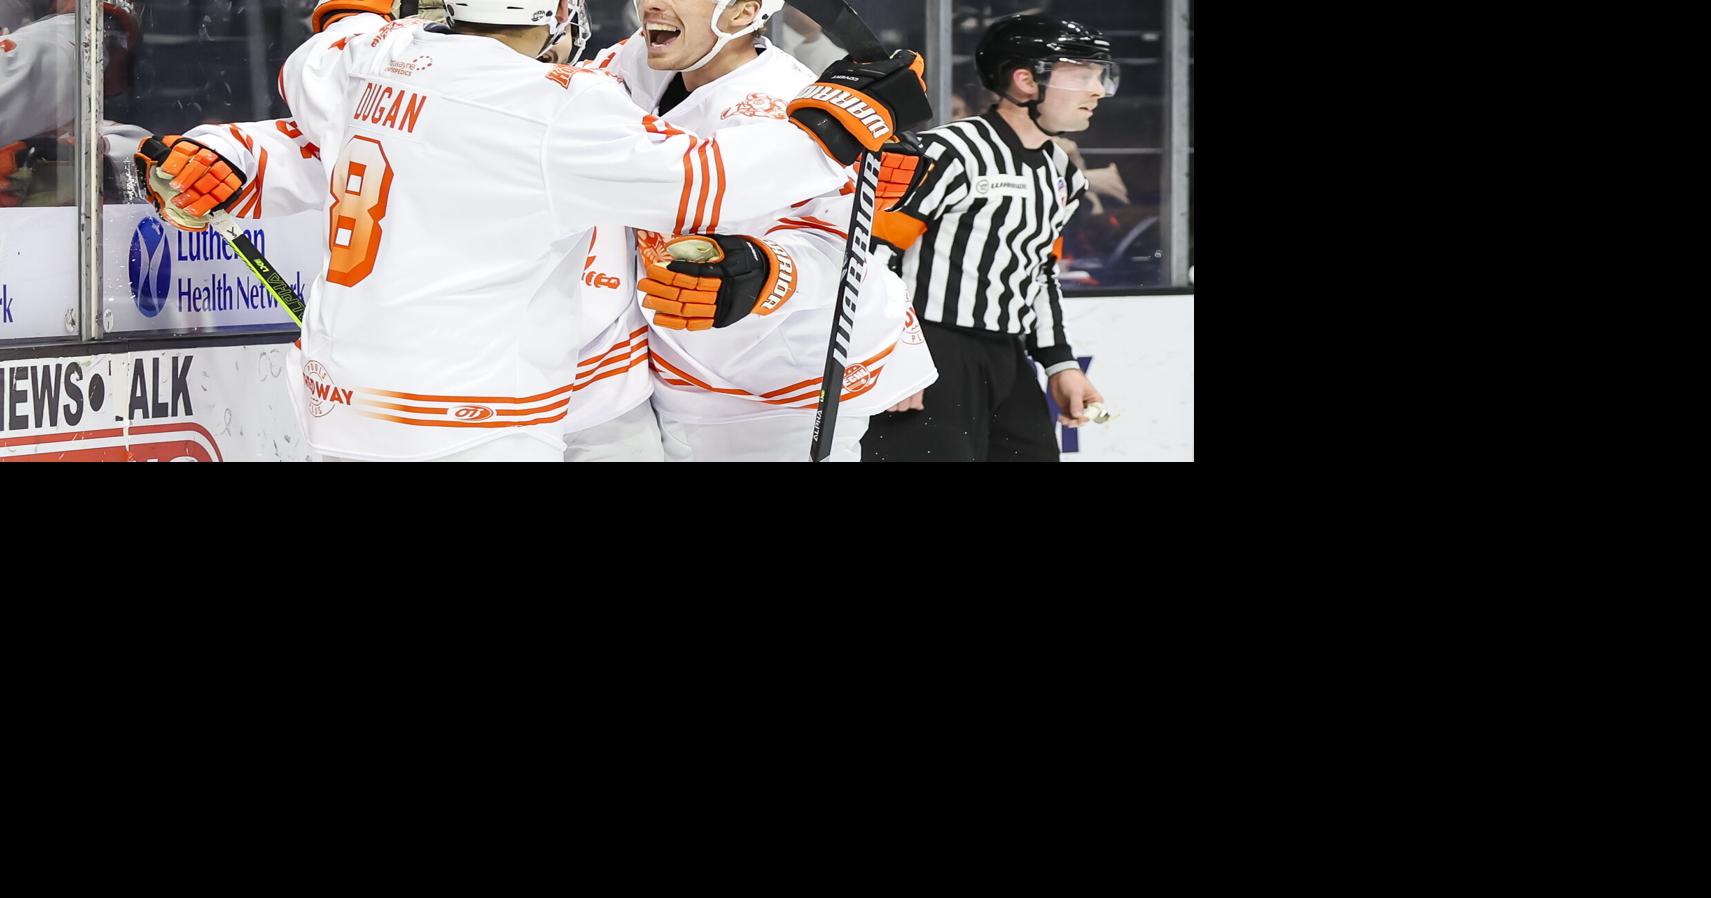 What Is Cross-Checking In Hockey? - FloHockey